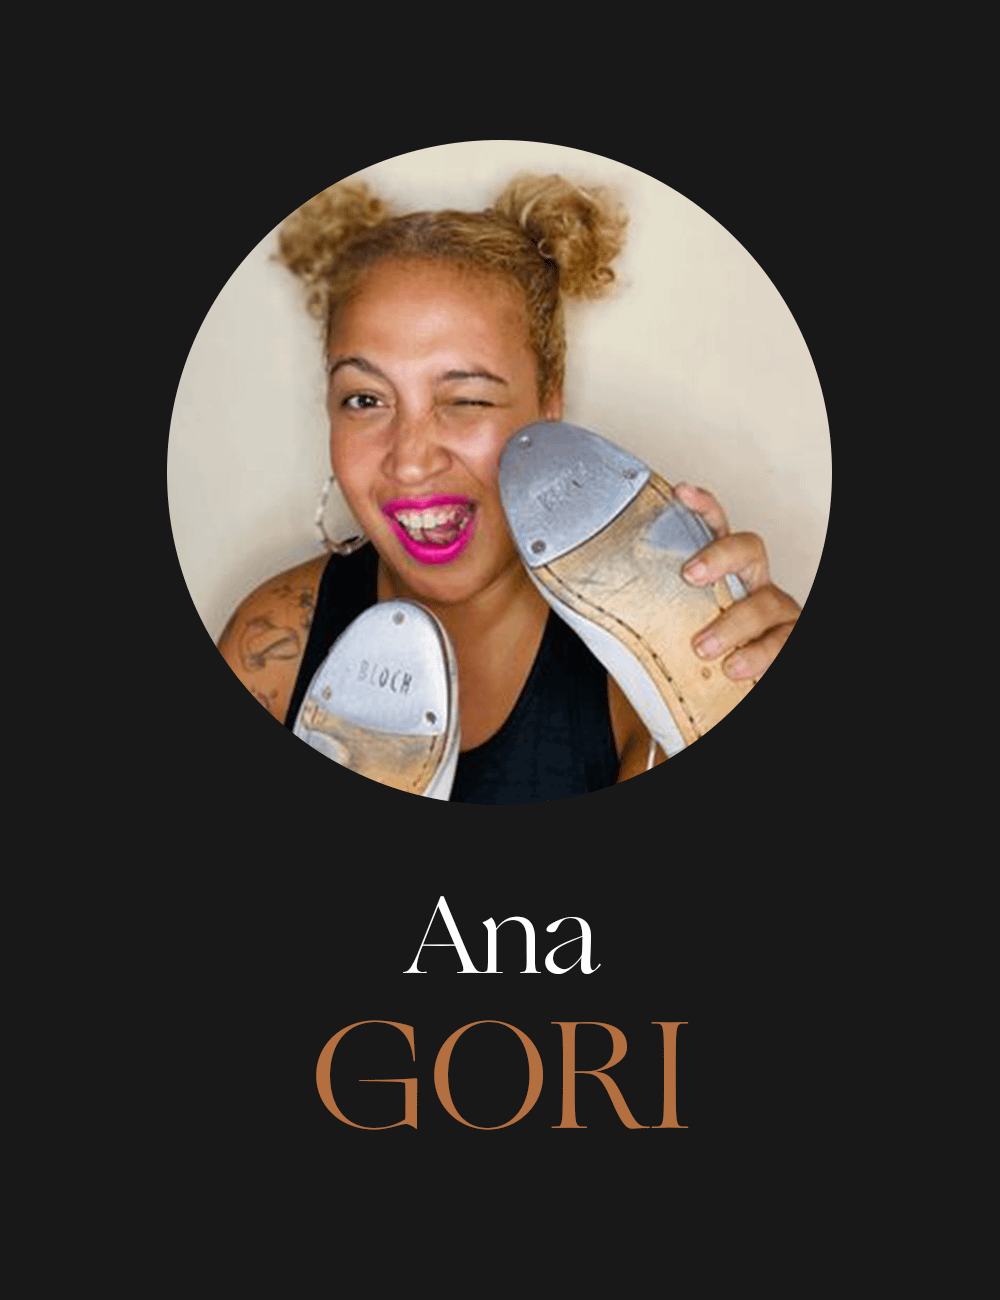 Black poster with a picture of a black woman holding a pair of tap shoes, winking and smiling, inside a circle. Below the circle, the name “Ana” in white and “GORI” in beige.